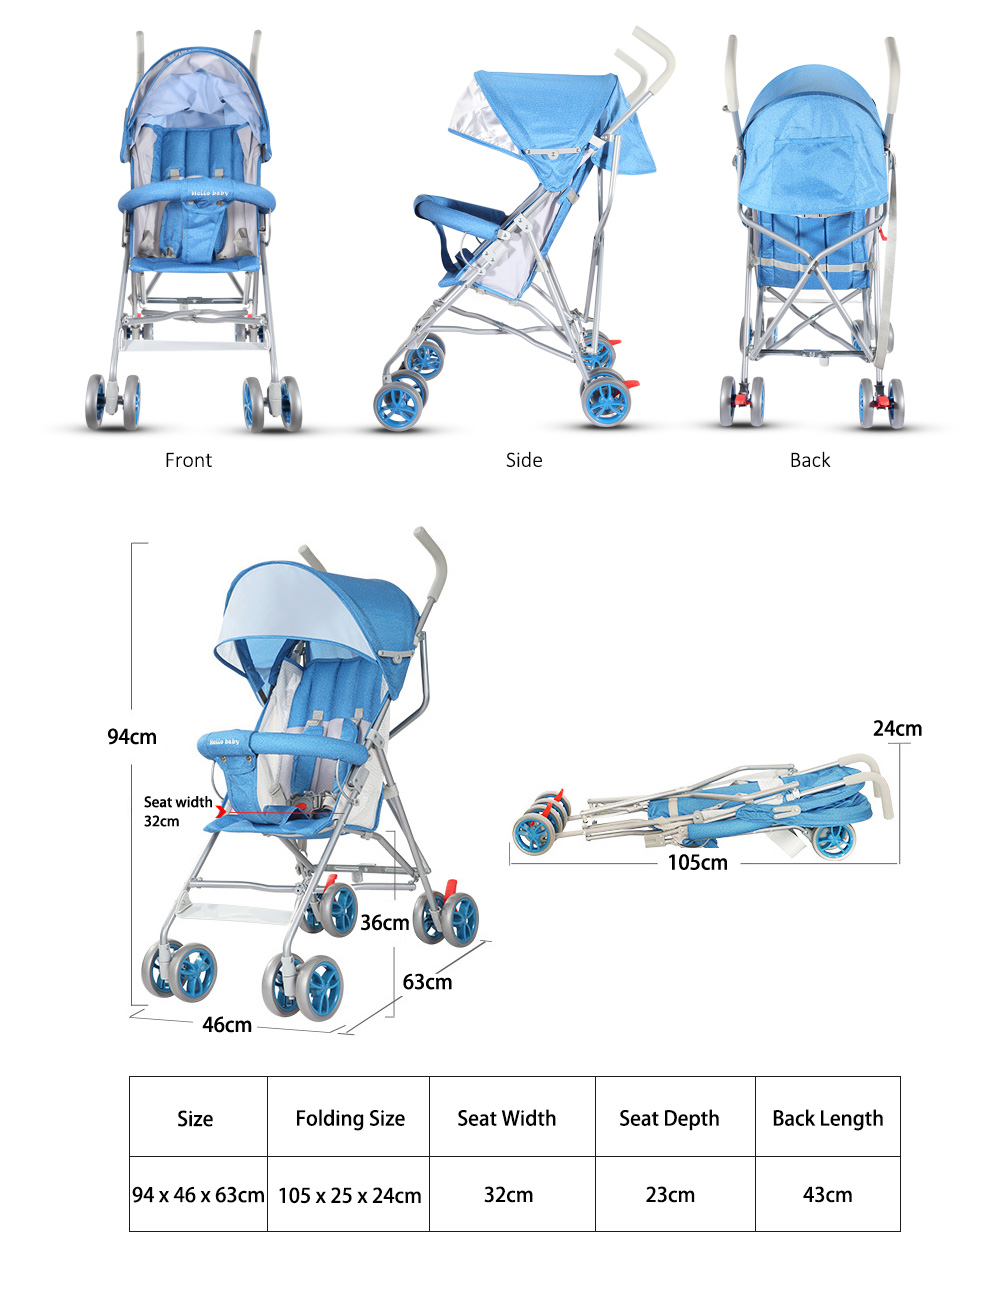 Shockproof Folding Baby Stroller Cart Carriage